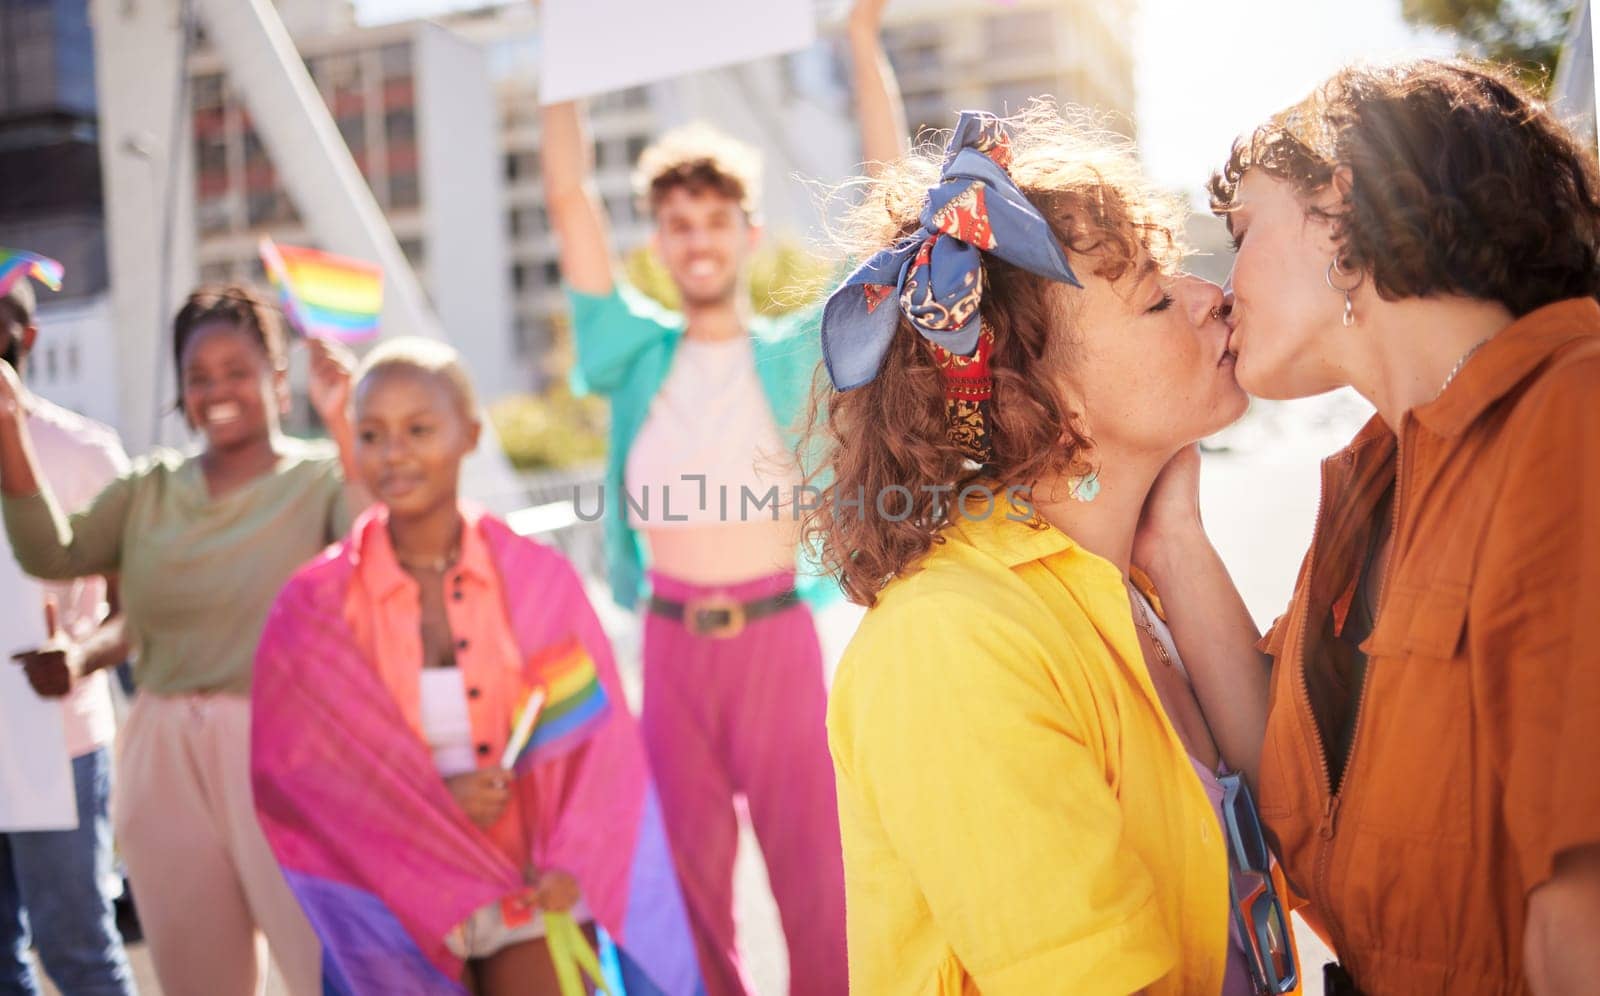 Love, kiss and couple of friends in city with rainbow flag for support, queer celebration and relationship. Diversity, lgbtq community and group of people enjoy freedom, happiness and pride identity.